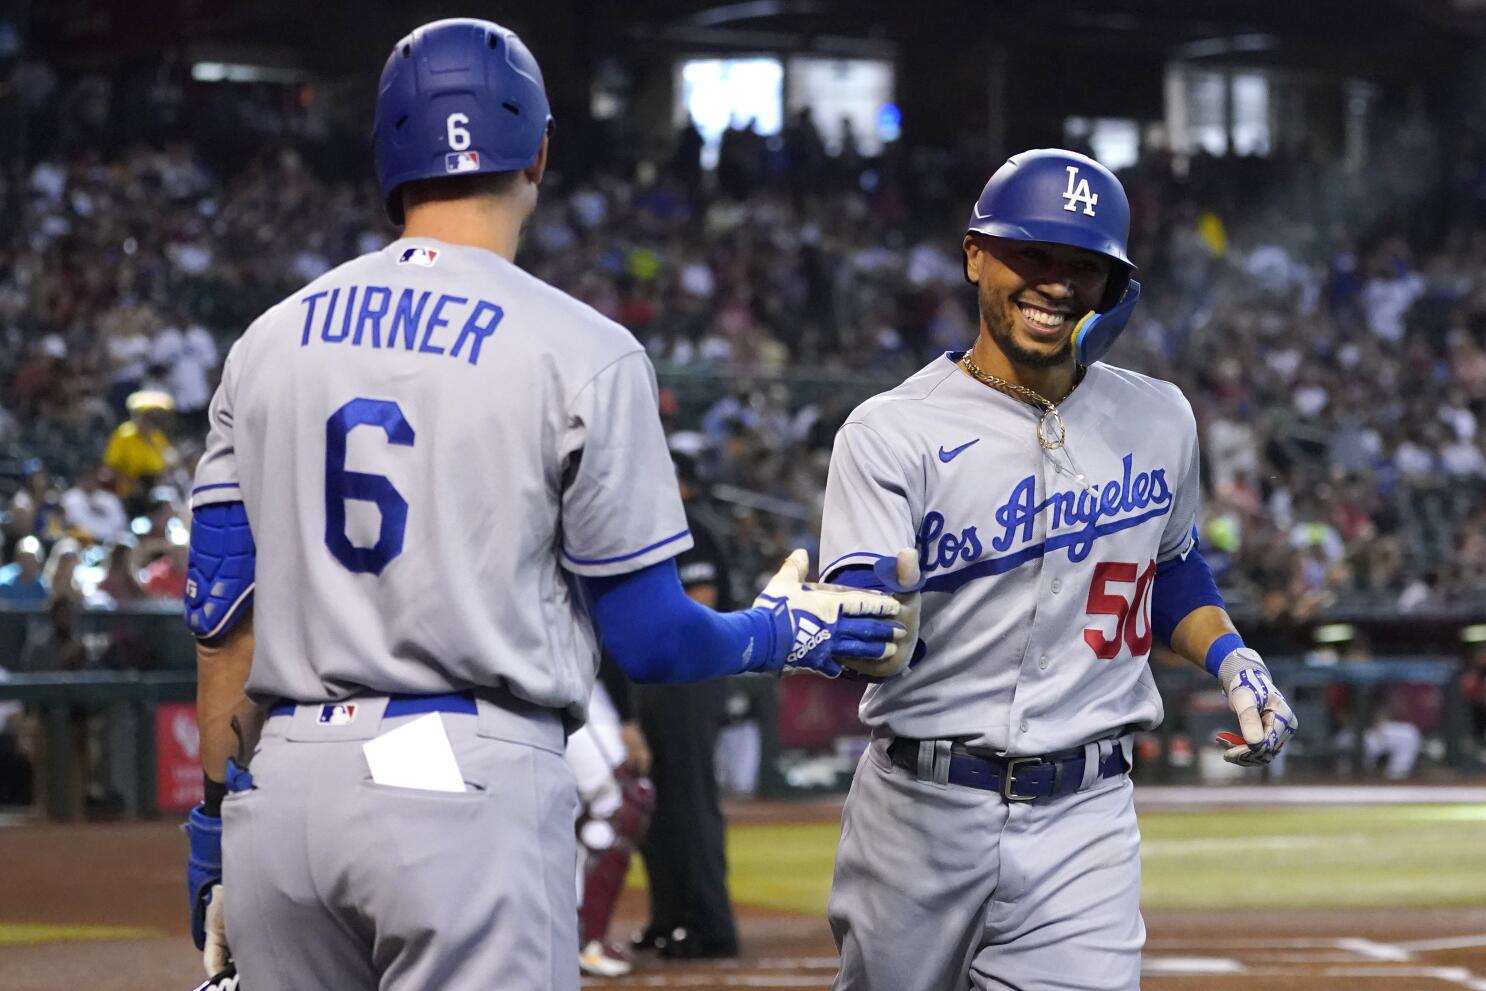 Could MLB Home Run Derby Slow Dodgers Star Betts in Second Half?